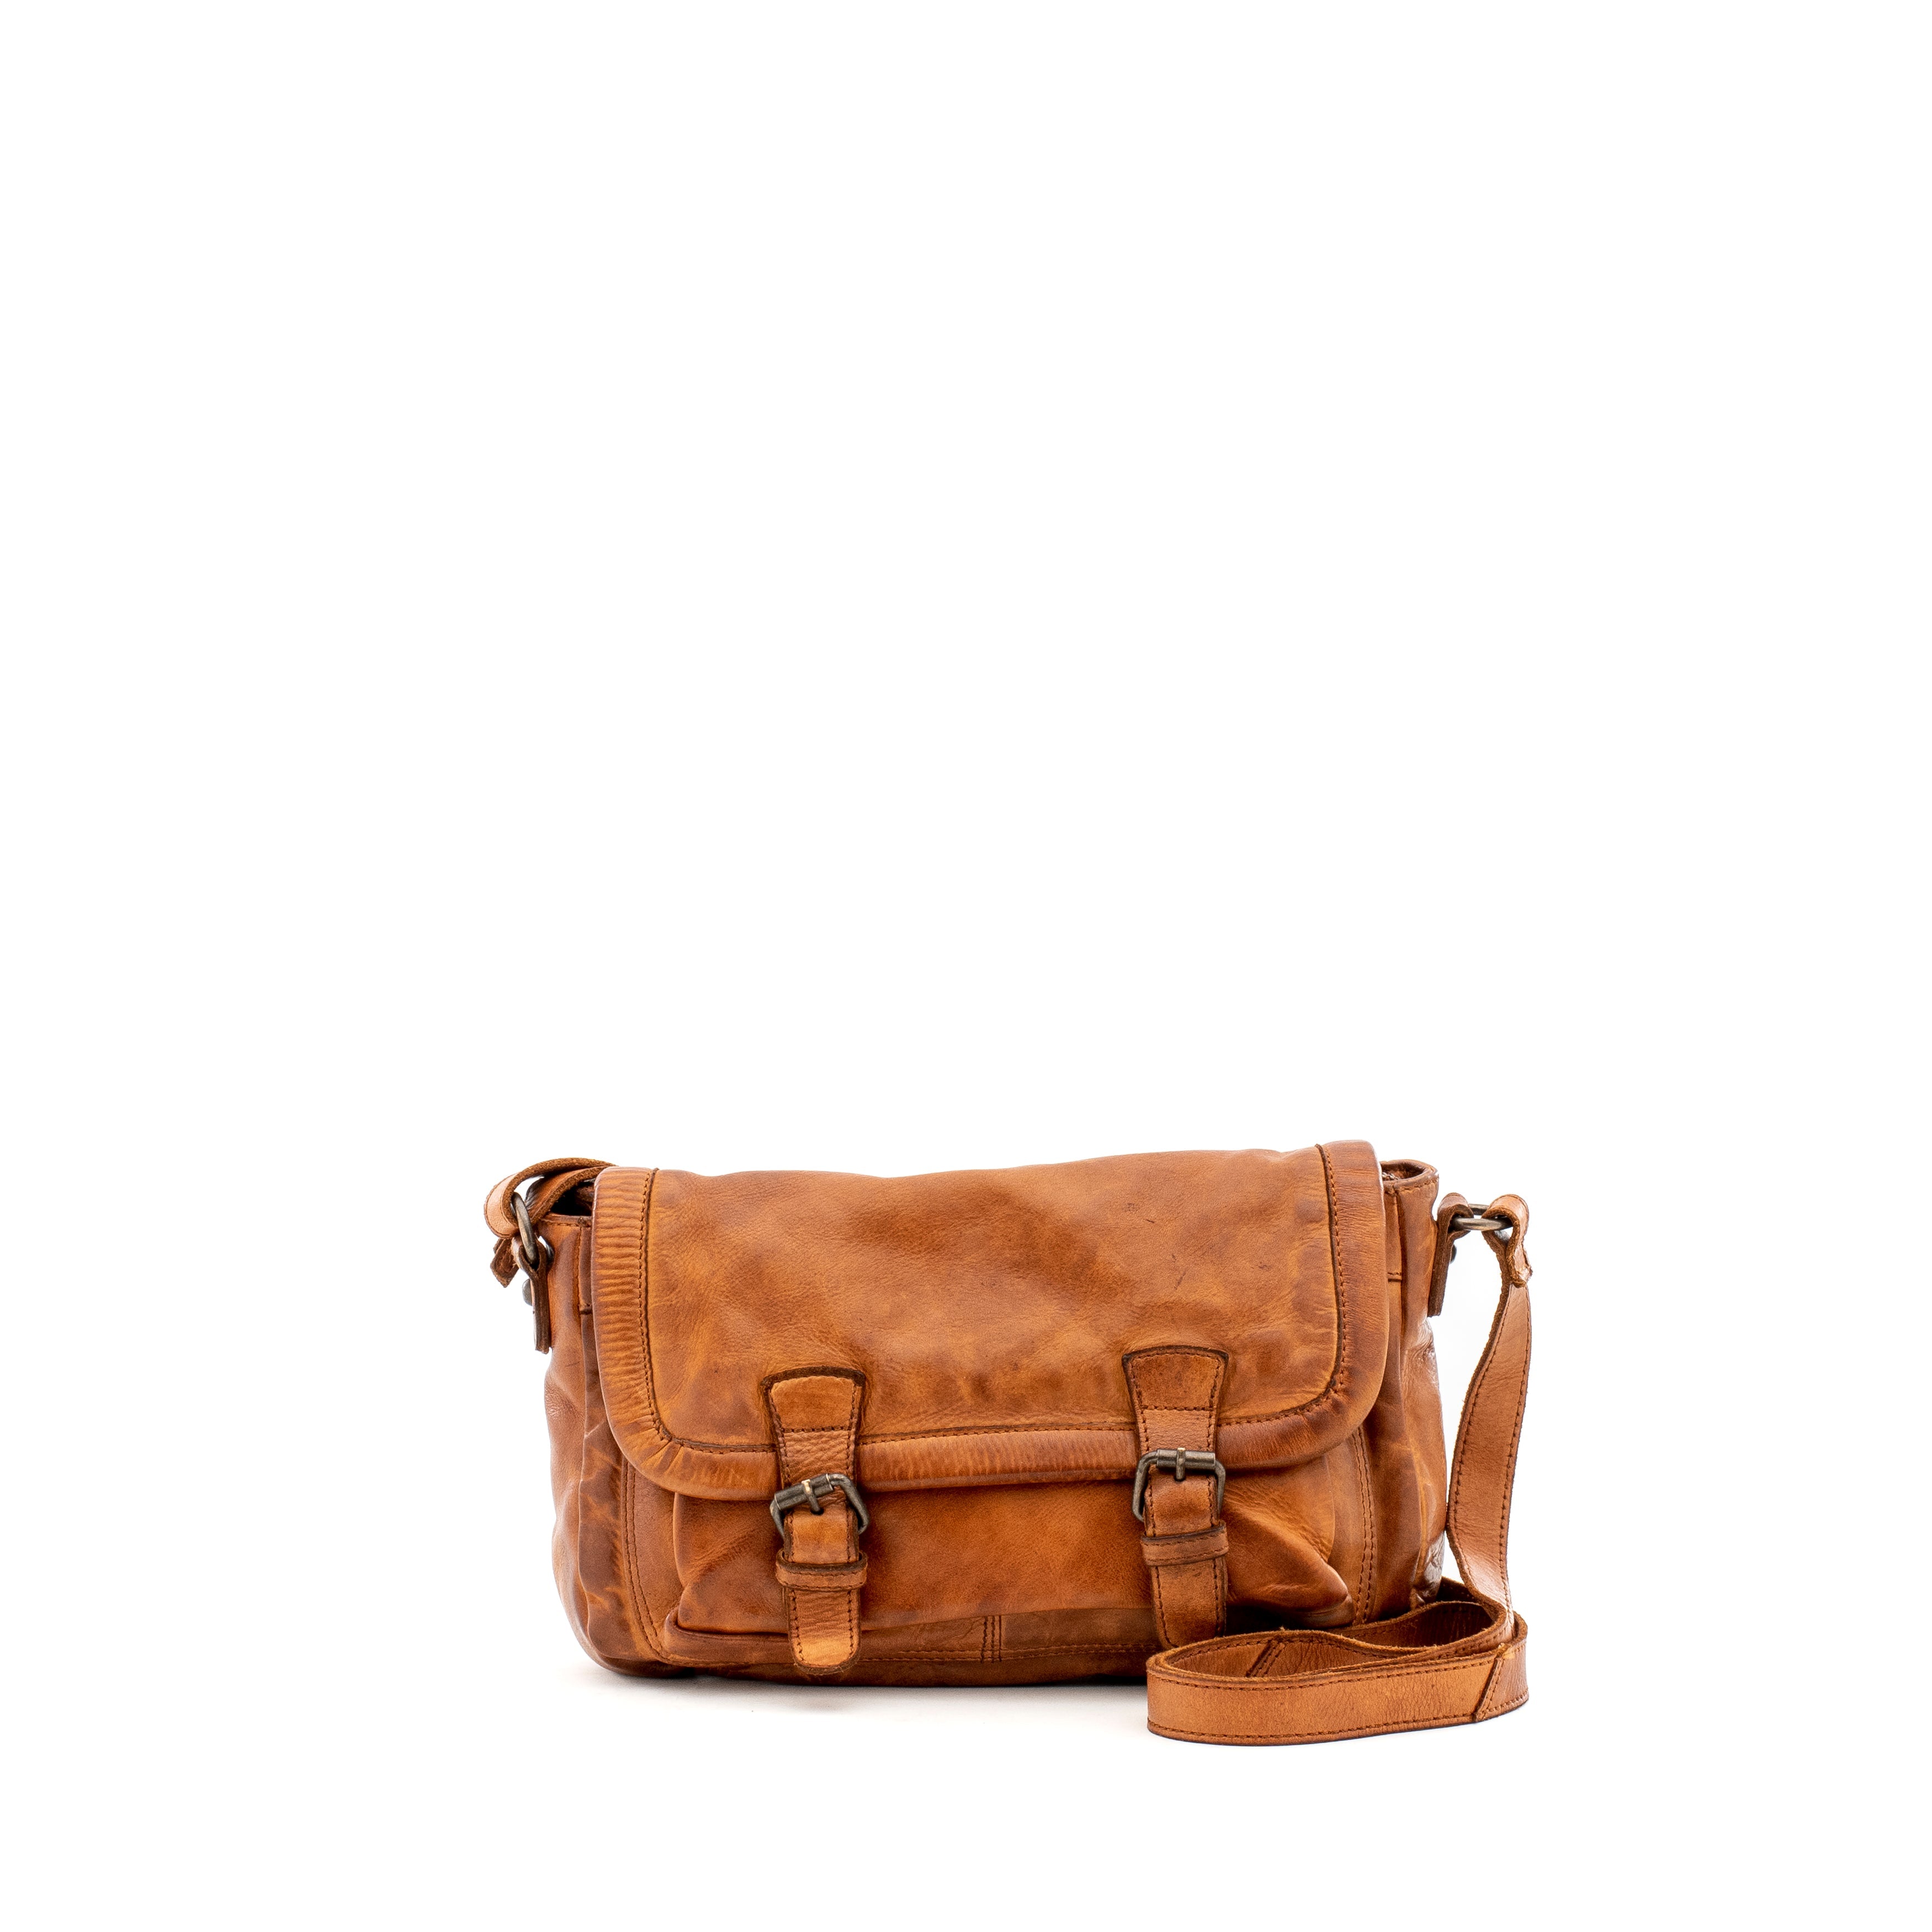 Brown leather satchel bag with adjustable strap and buckle closures